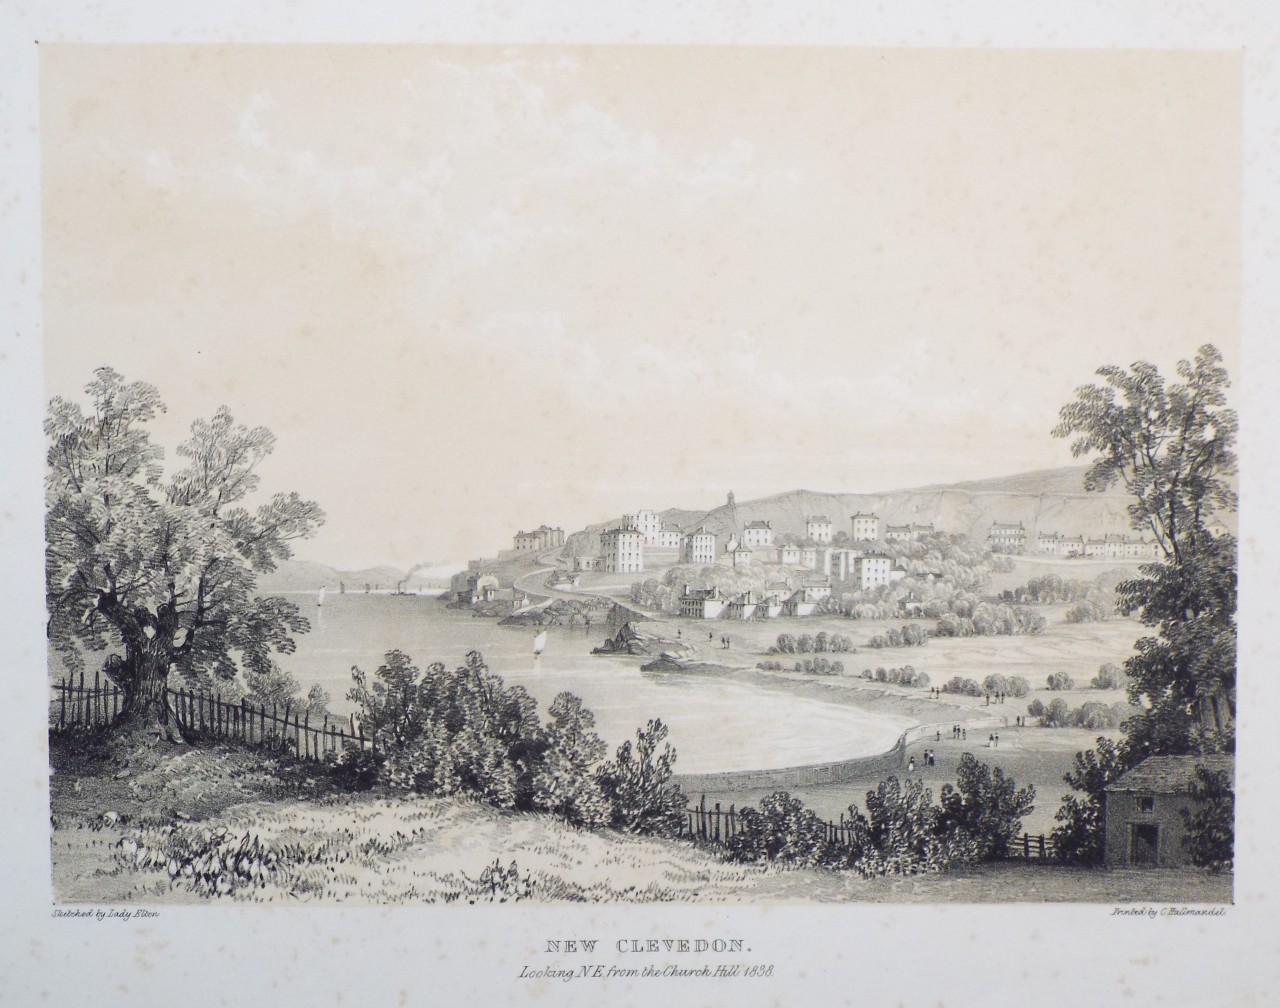 Lithograph - New Clevedon. Looking N E from the Church Hill 1838.